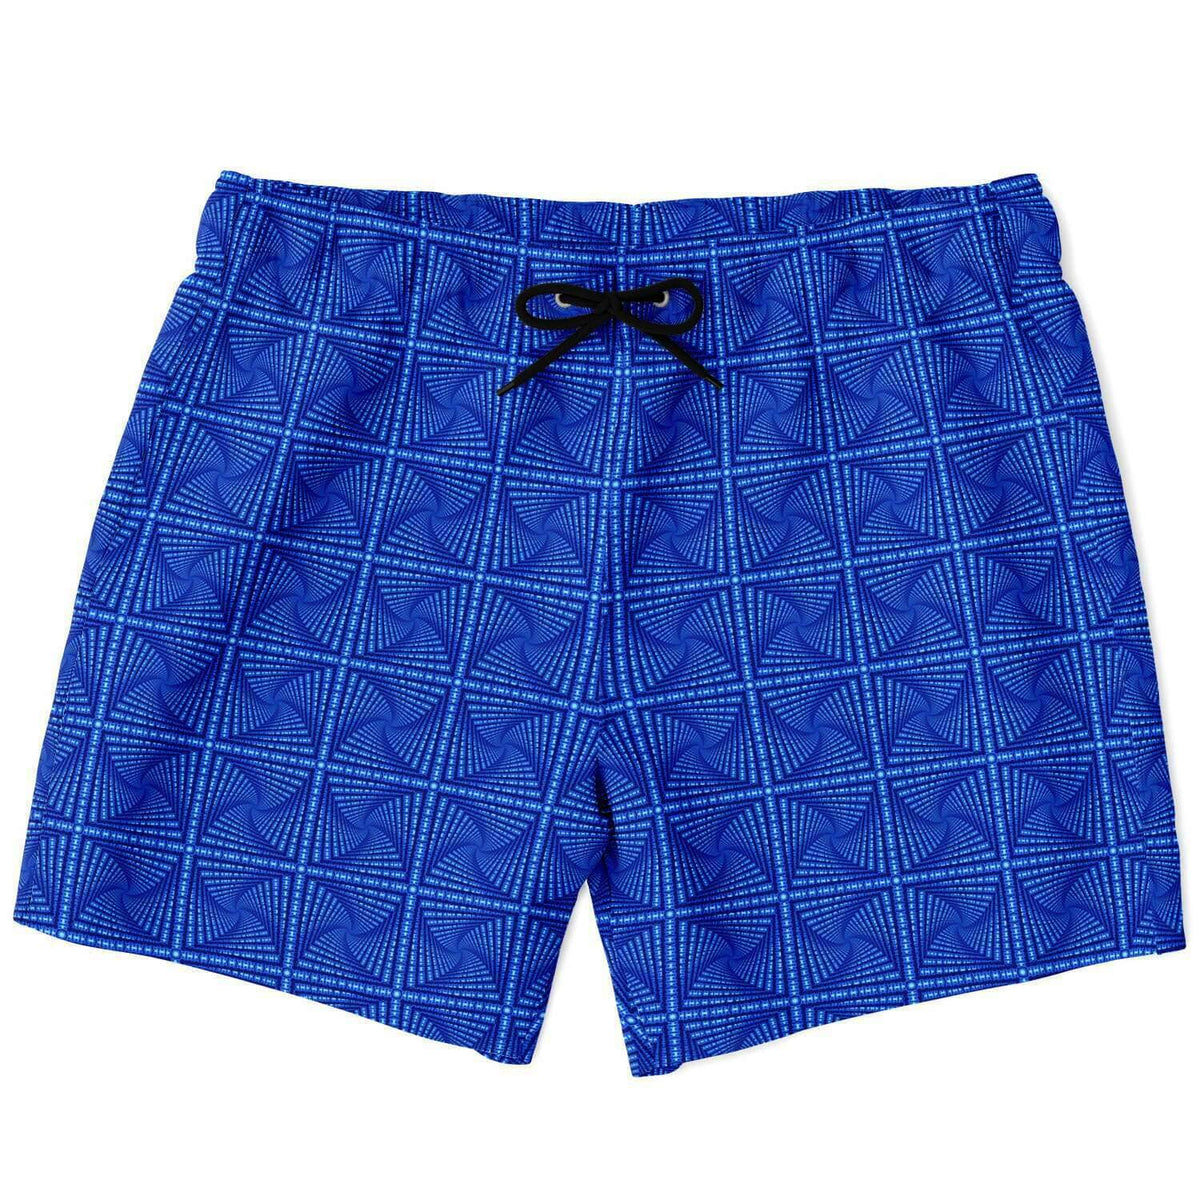 Majestic Blue Fractals Swimming Trunks (#5382)